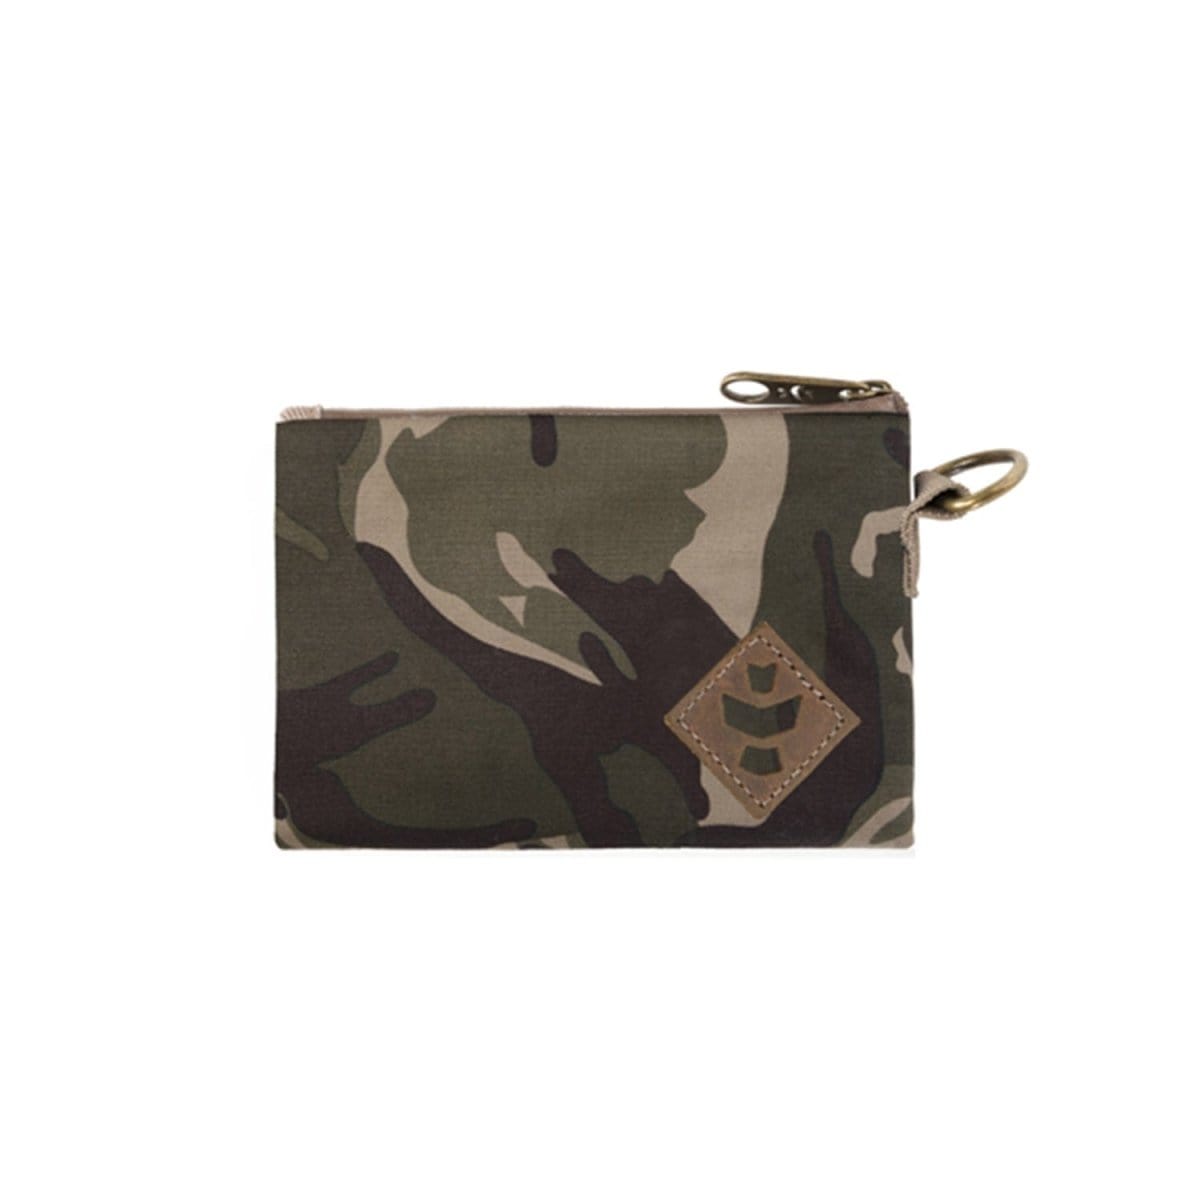 Revelry Supply Travel Bag Camo Brown The Mini Broker - Smell Proof Zippered Small Stash Bag